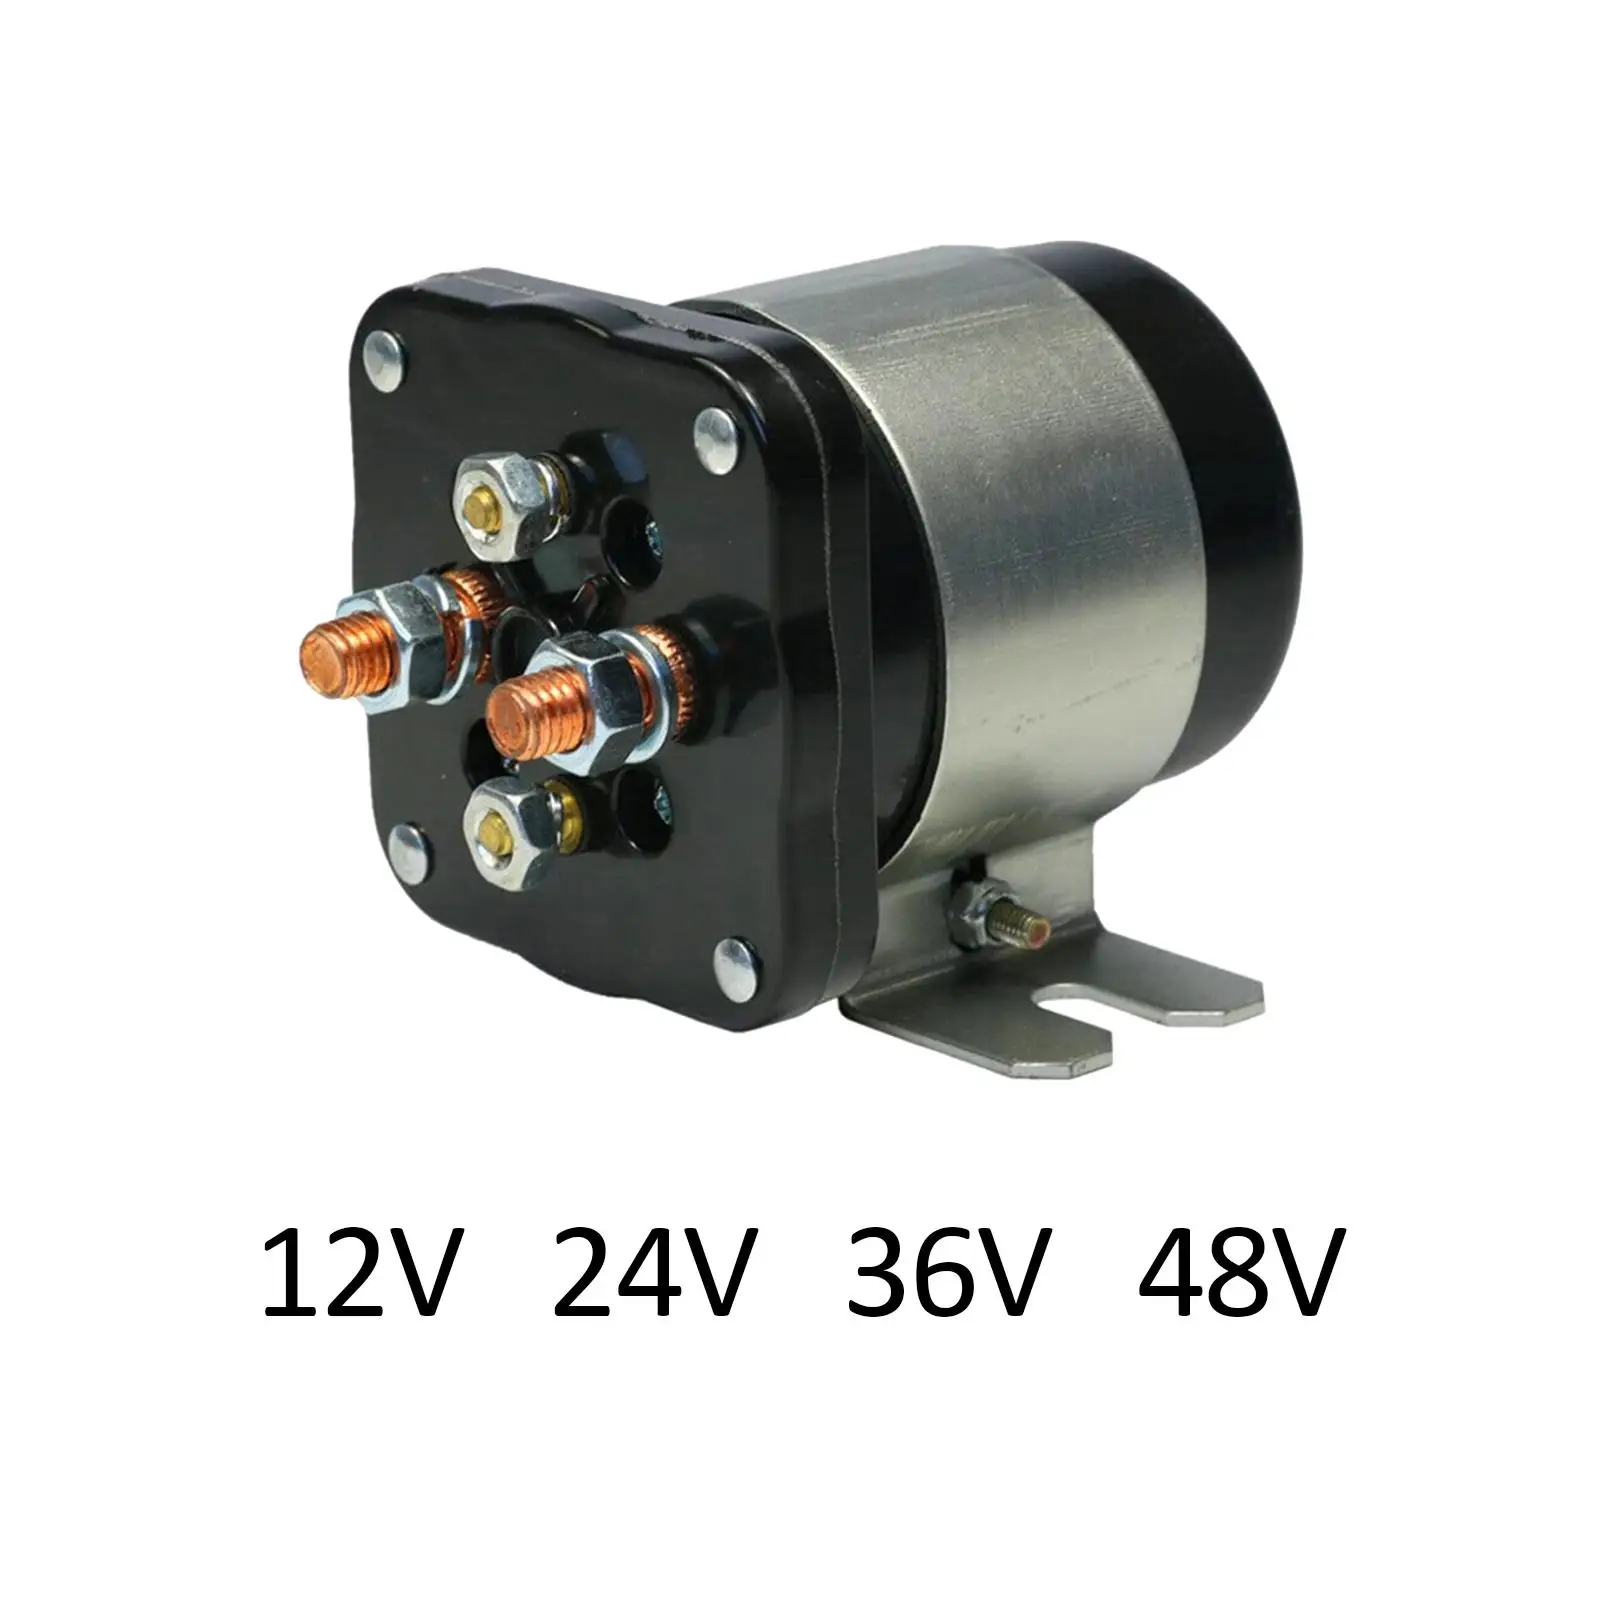 Solenoid Switch 3740068 Replaces 3050692 C 52138 7750000111 586-114112-6A 3050692 for Kobelco SK200 SK200LC SK250LC SK150LC